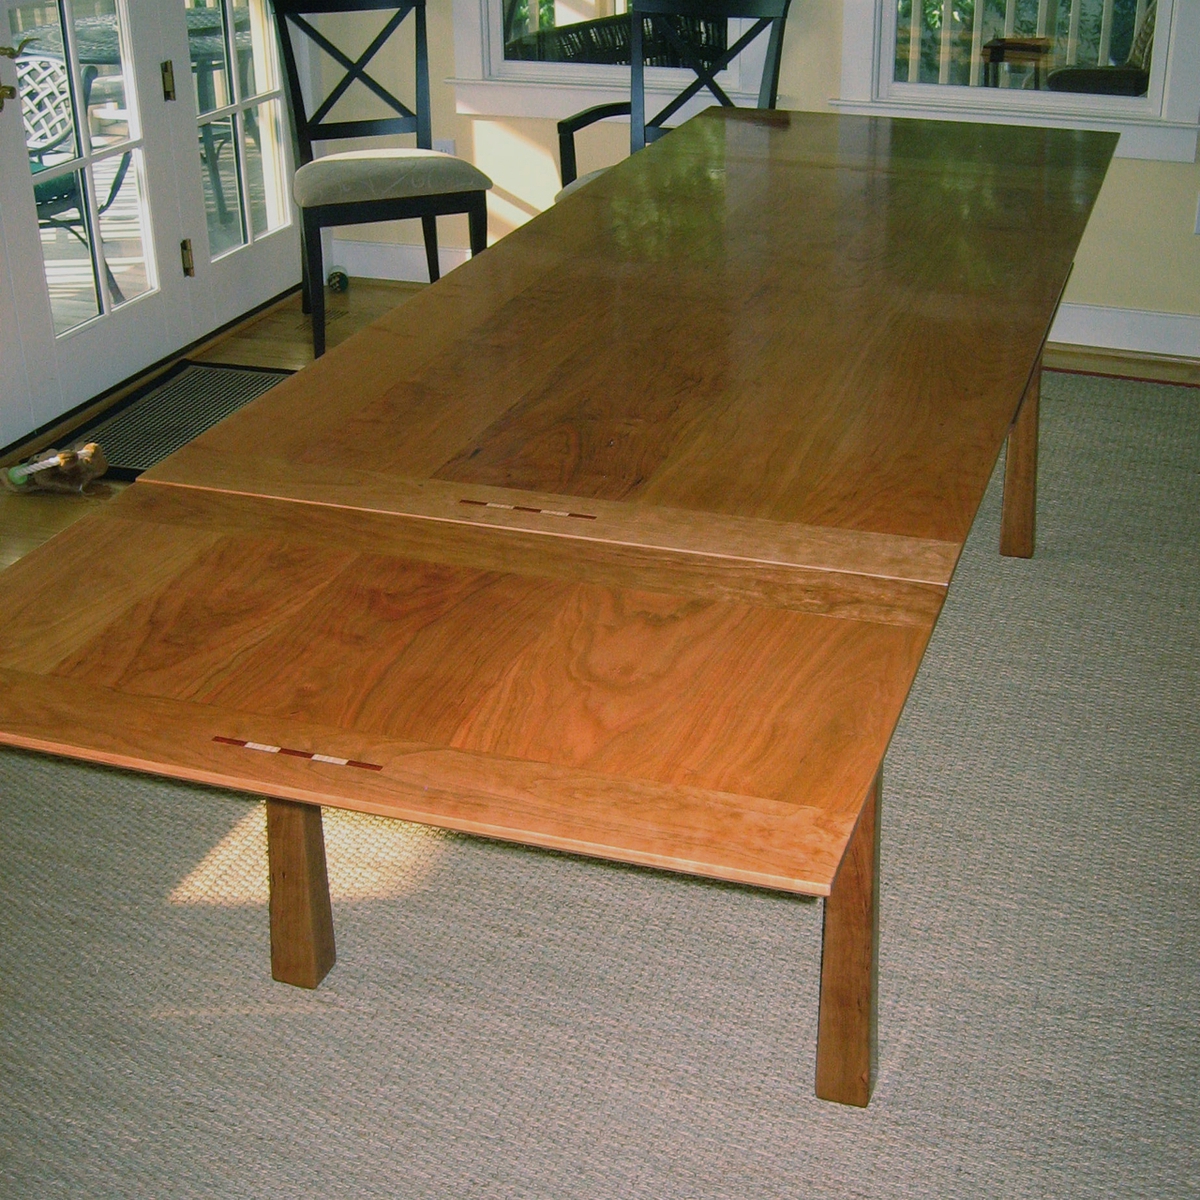 jx1k9eOGSTWDCkB8NtSI_Dutch-Pull-Out-Dining-Table-extended.-Joseph-Murphy-Furniture-Maker-at-CustomMade.com_.jpg